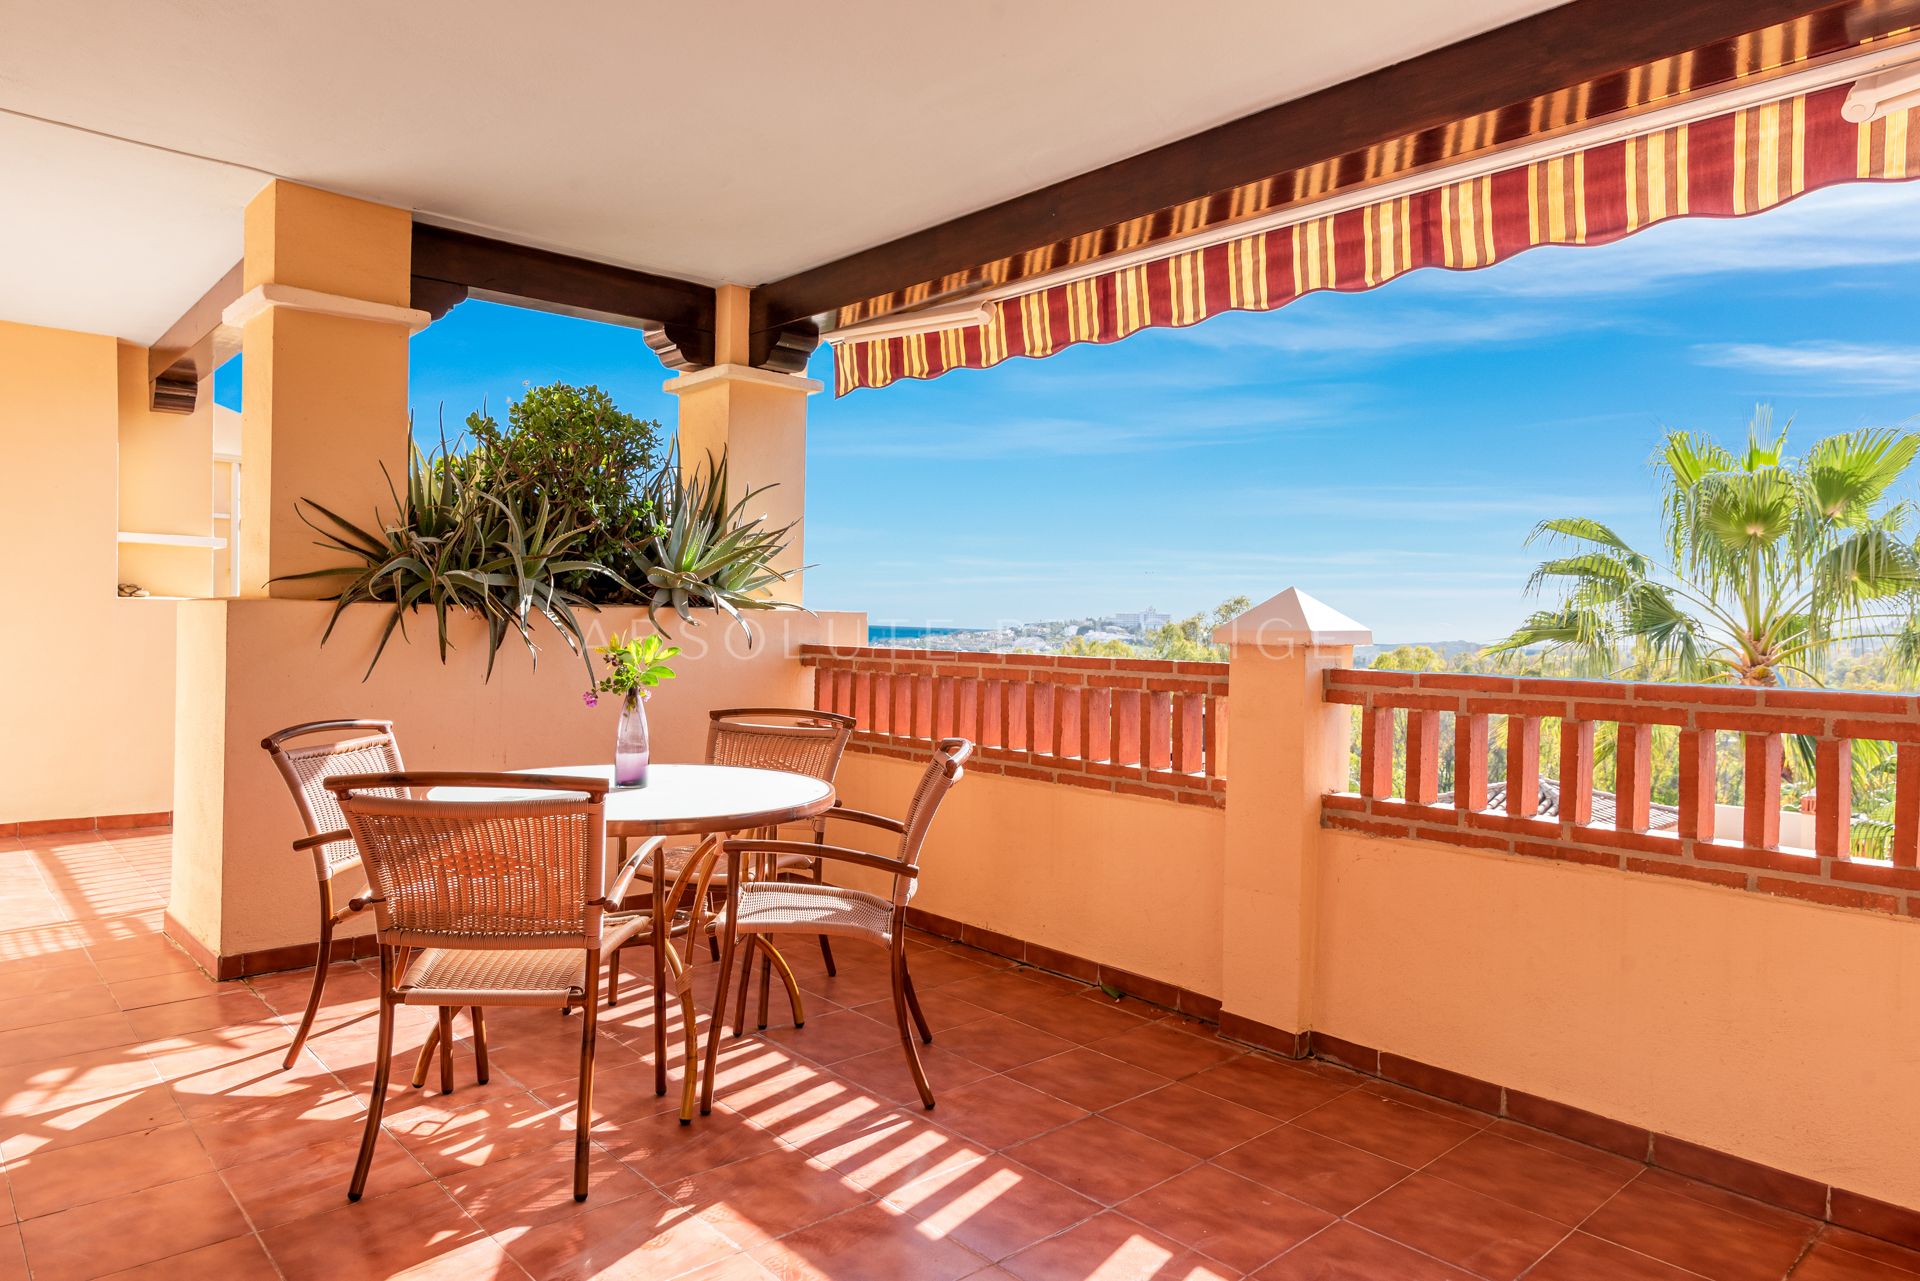 2-BEDROOM APARTMENT WITH STUNNING MEDITERRANEAN VIEWS FOR SALE IN ESTEPONA